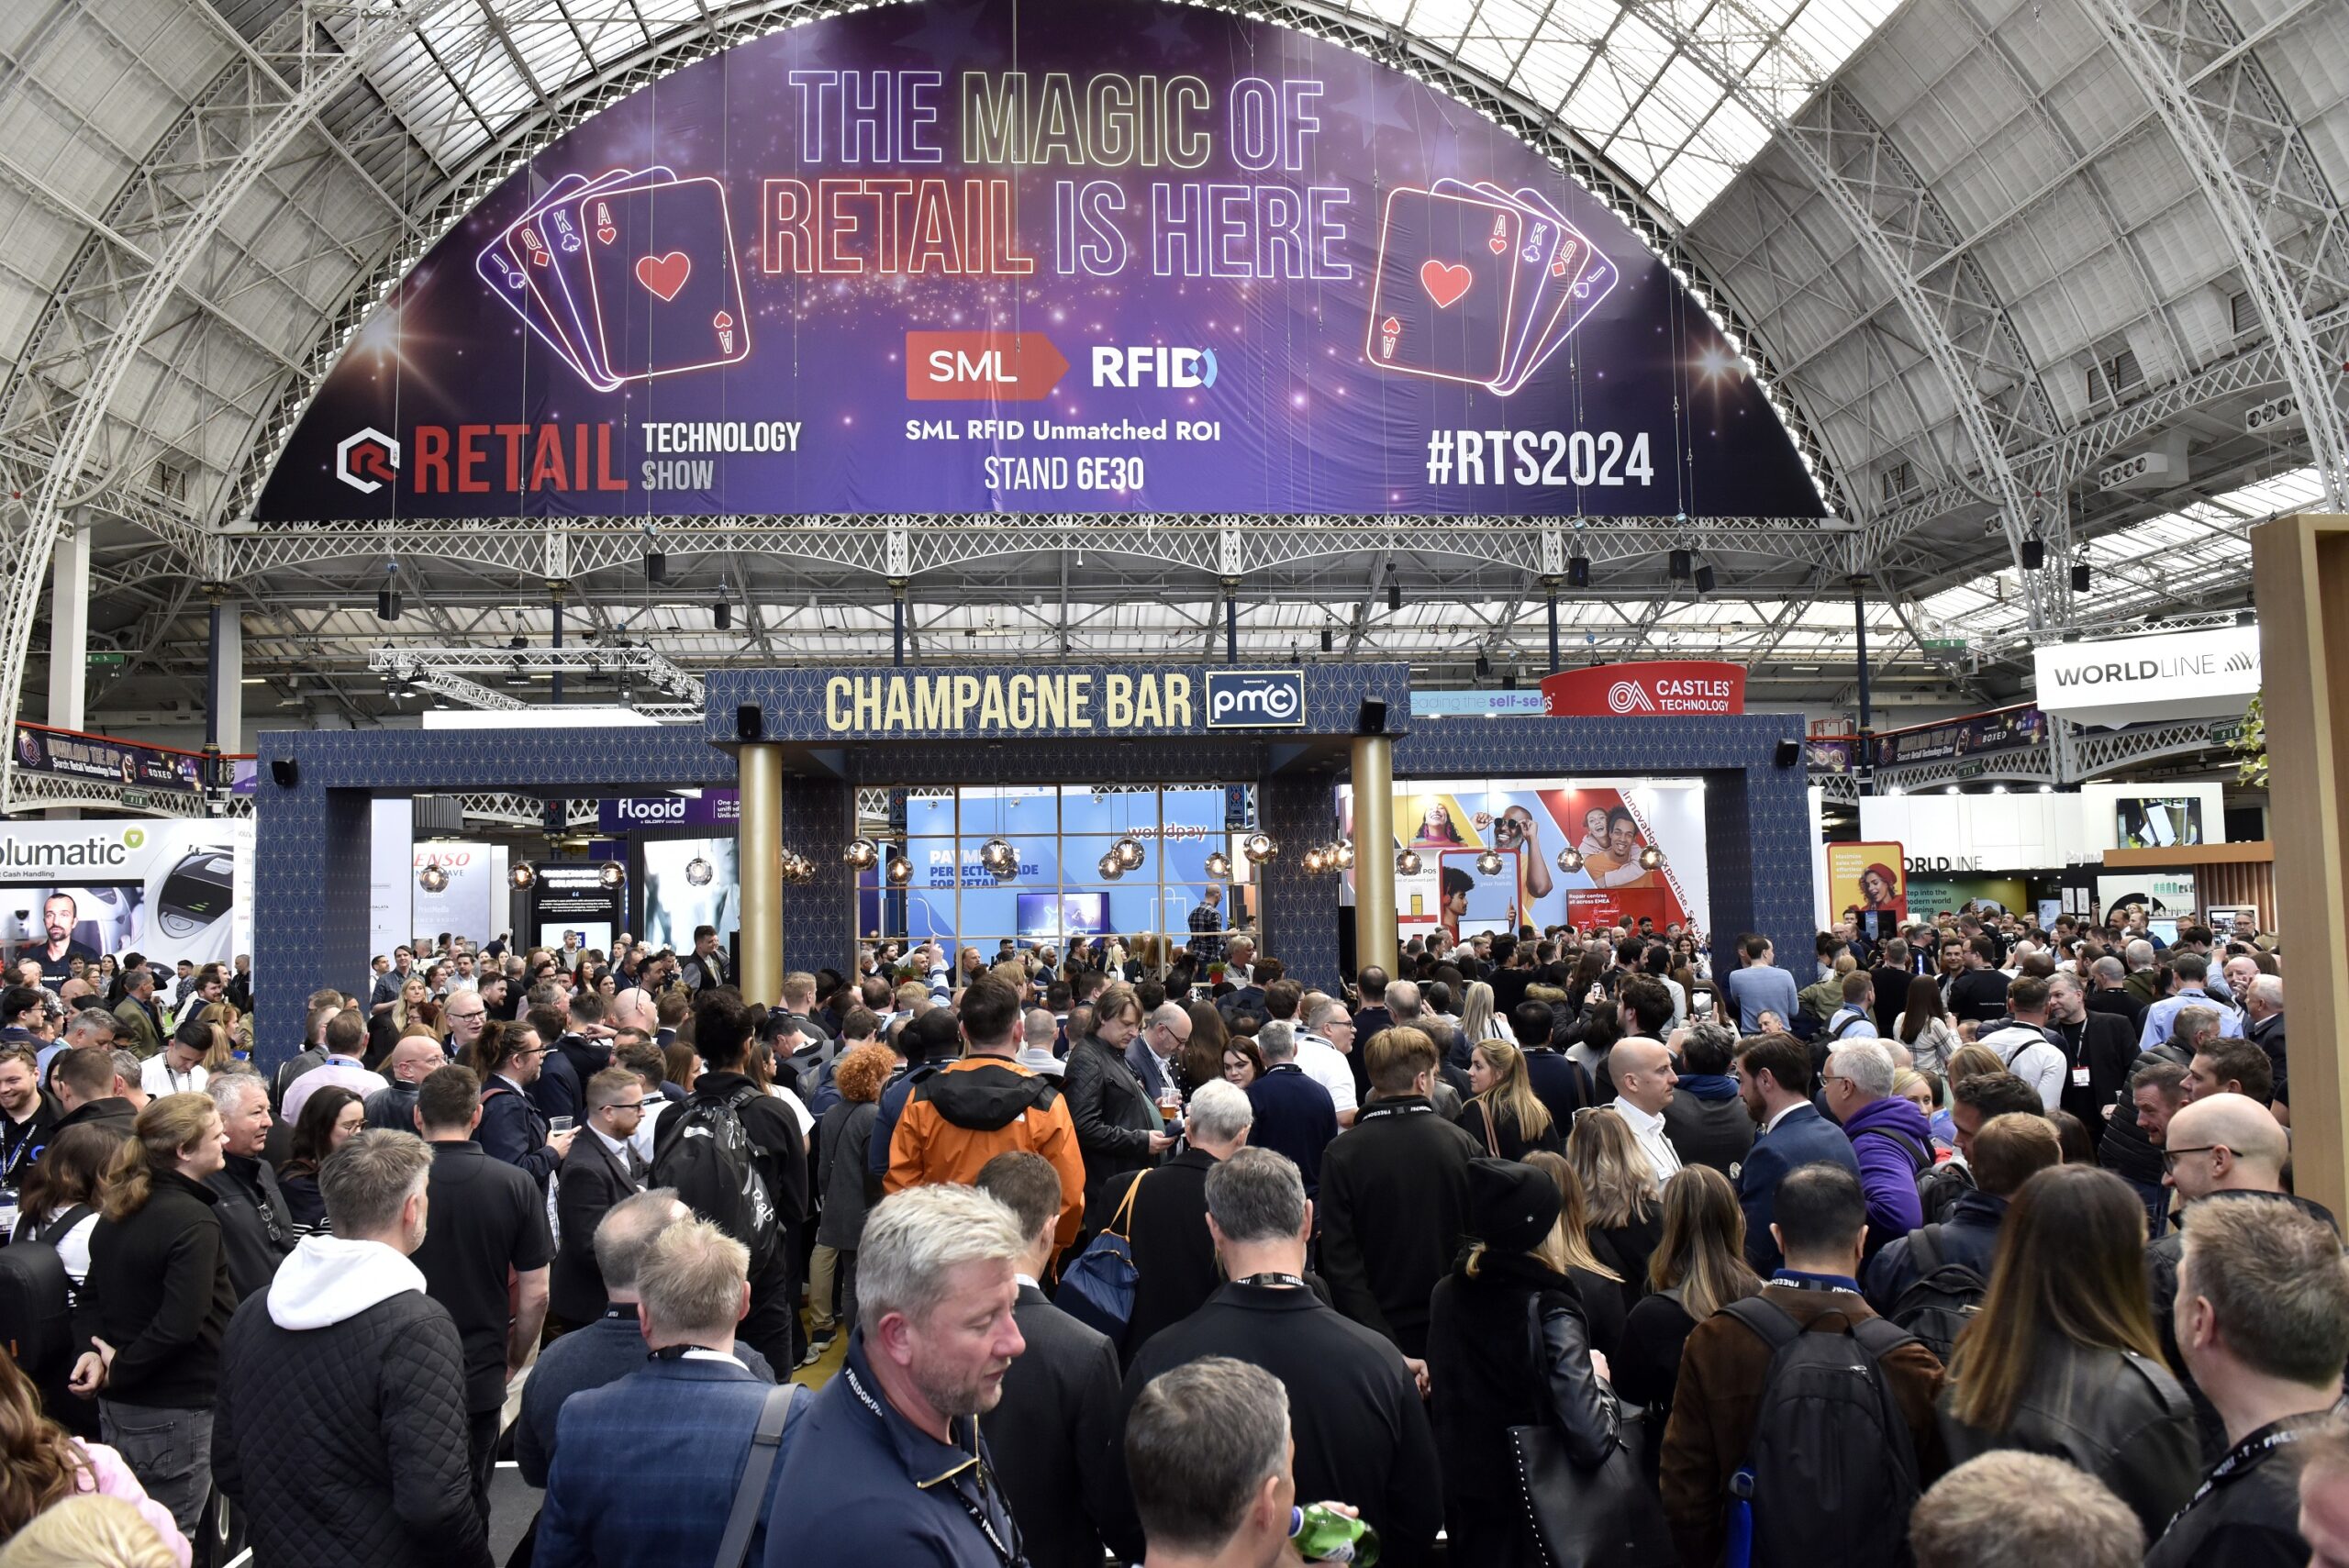 The Retail Technology Show brings the magic of retail to life, welcoming nearly 13,000 visitors to the two-day spectacular